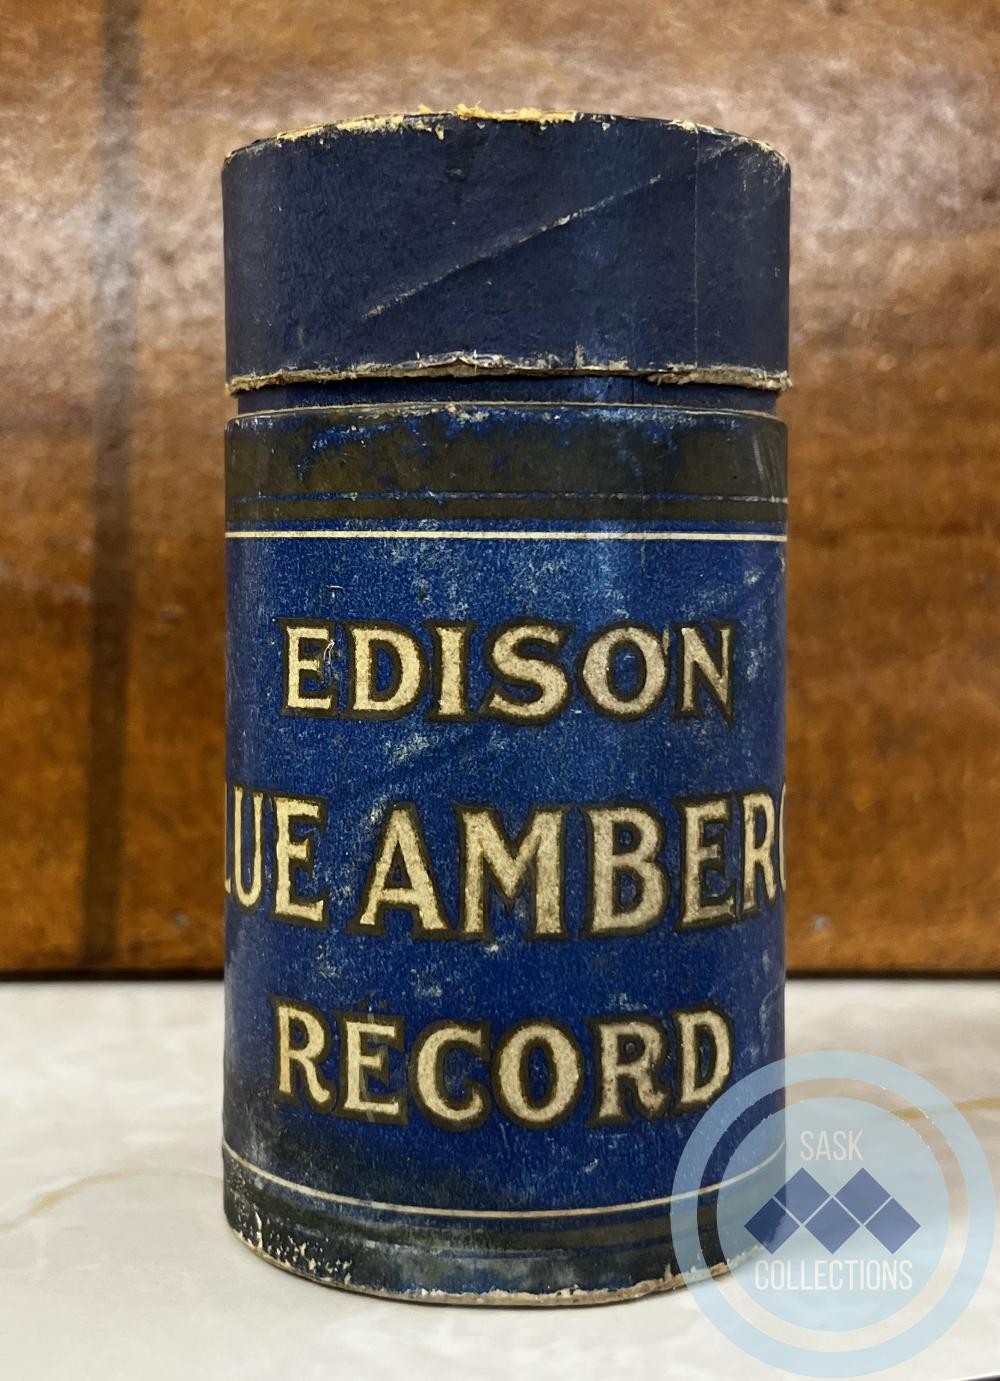 Gramophone cylinder record